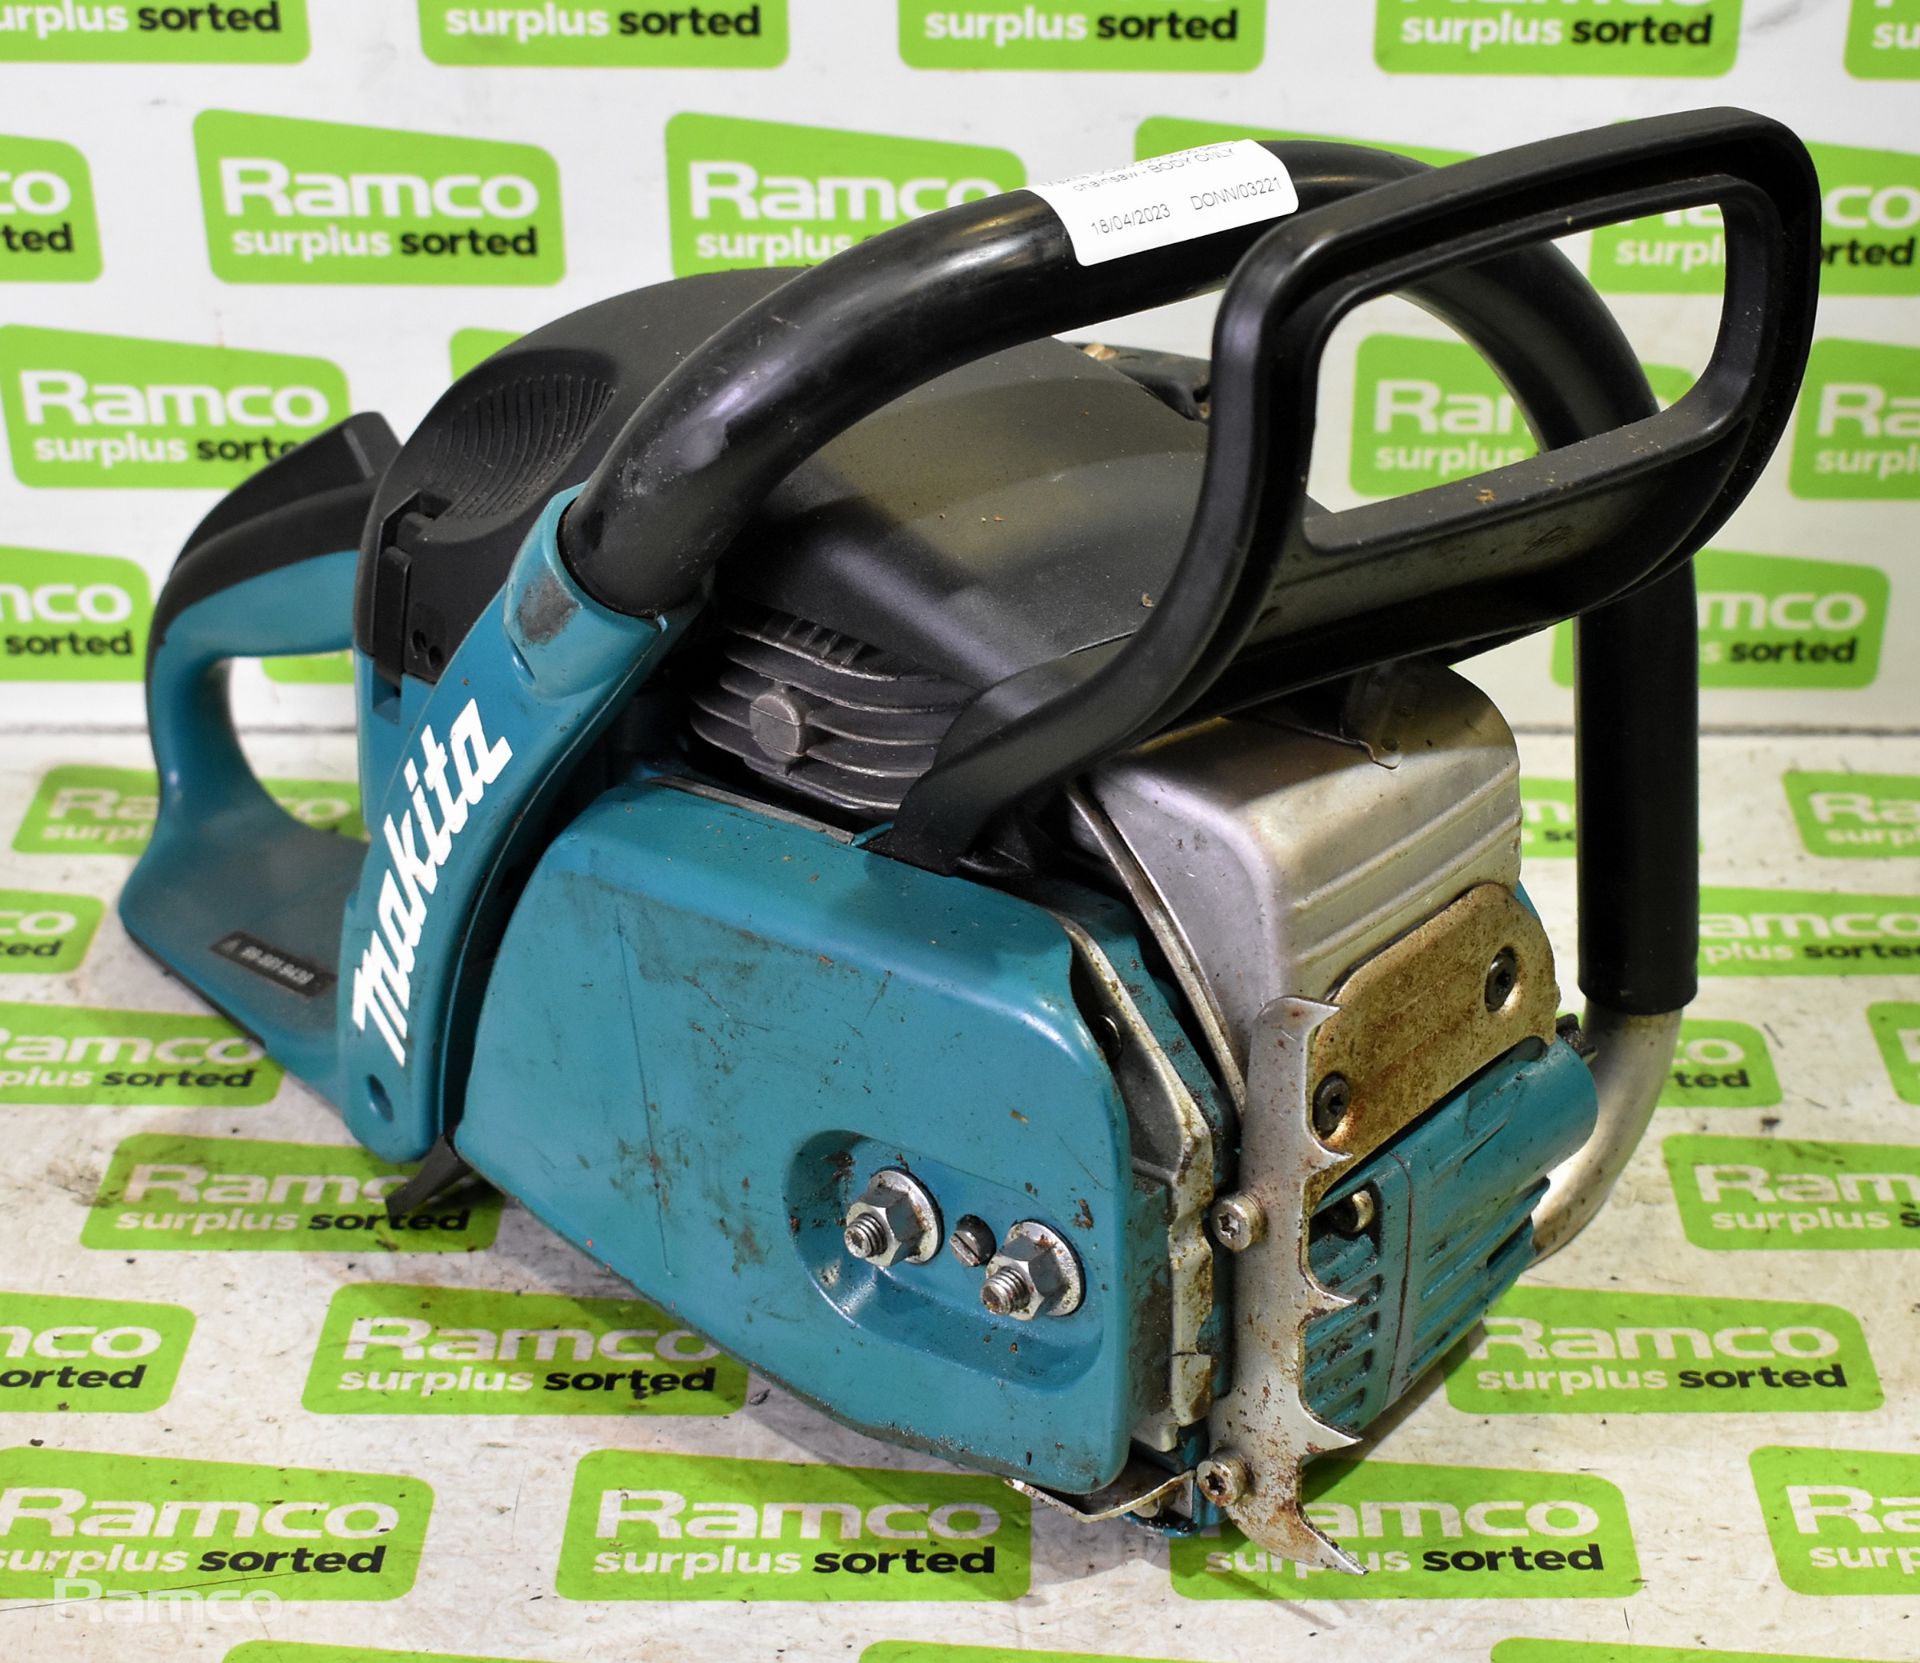 4x Makita DCS5030 50cc petrol chainsaws - BODIES ONLY - AS SPARES OR REPAIRS - Image 18 of 21